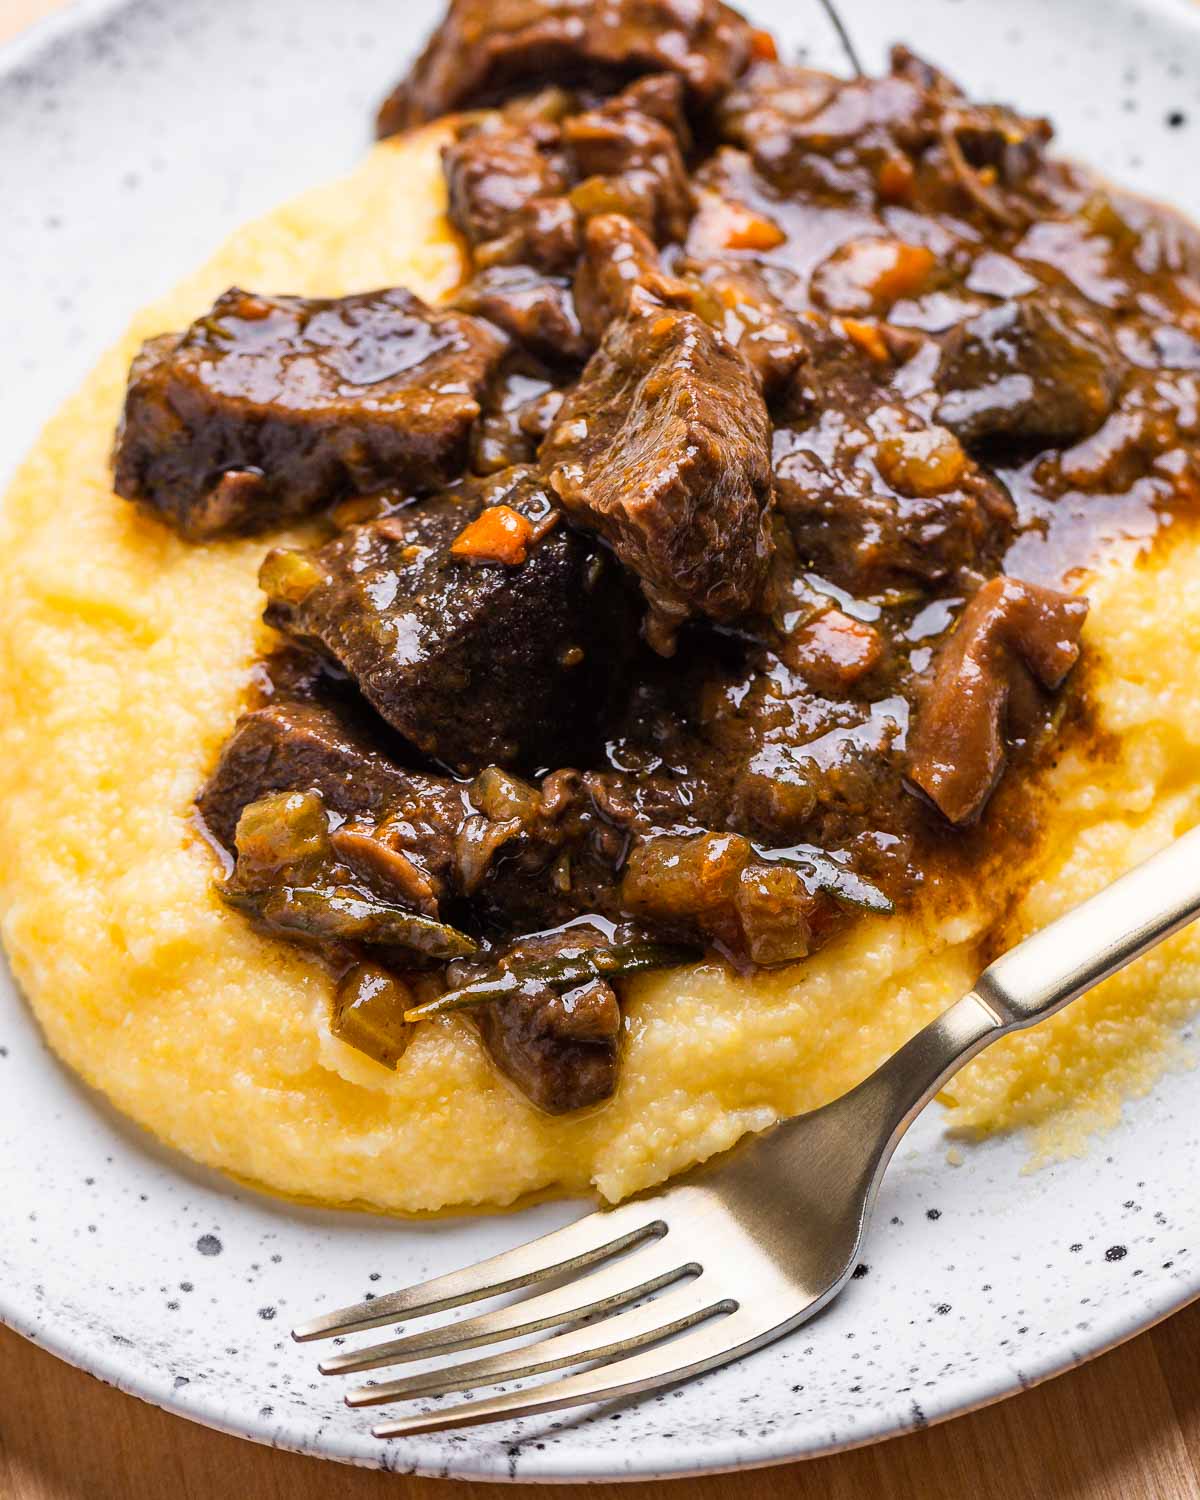 Creamy polenta topped with beef stew in white plate.